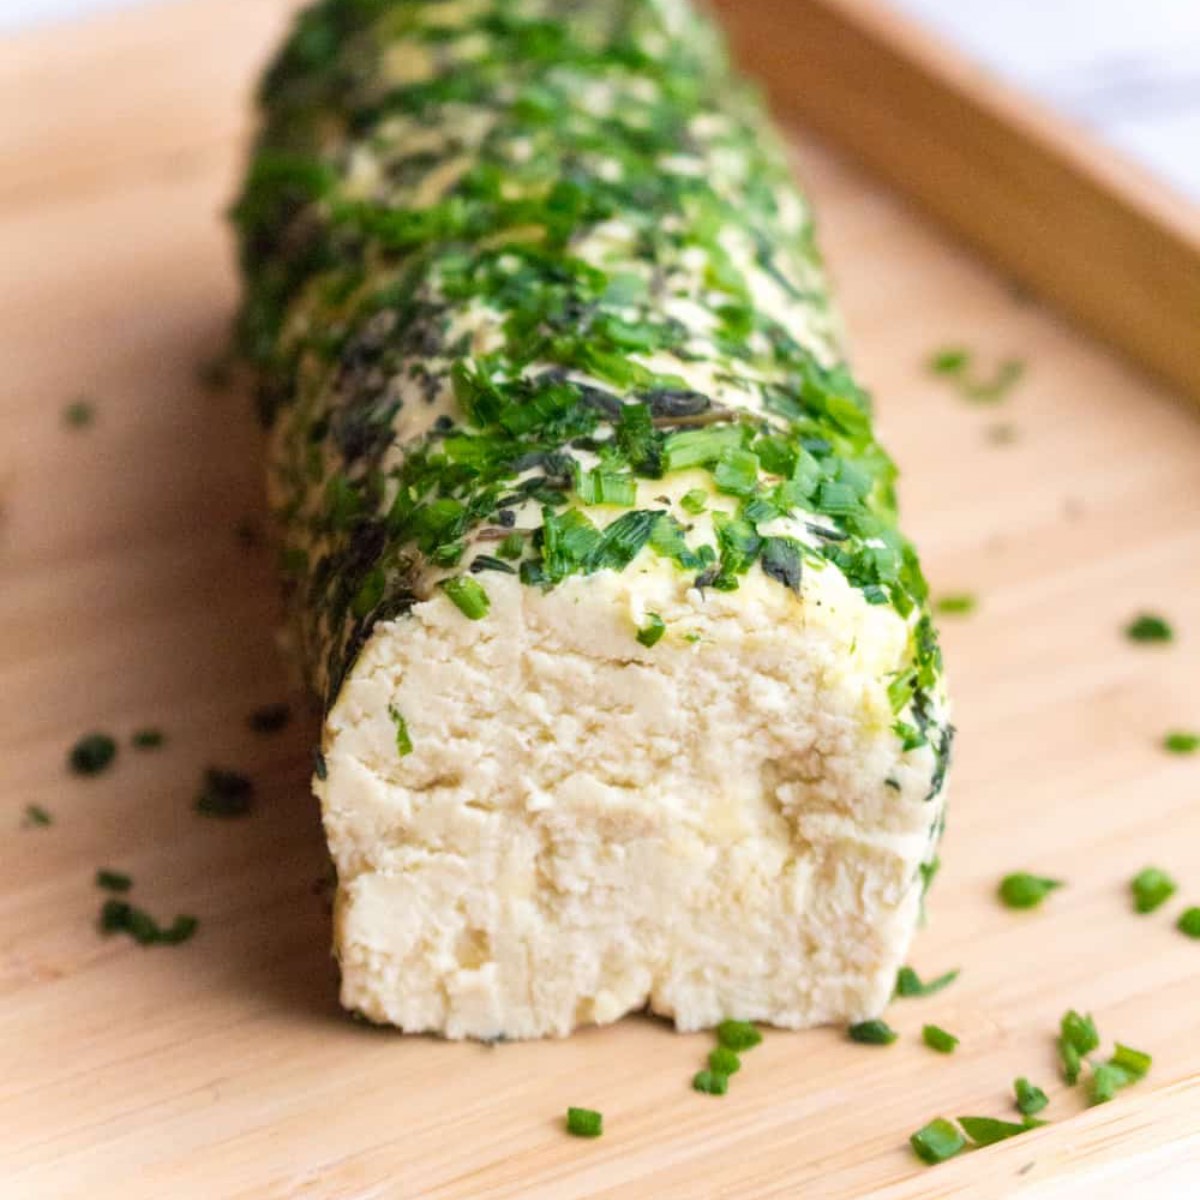 An almond-based vegan cheese log coated in sliced chives on a cutting board, with a slice taken out.